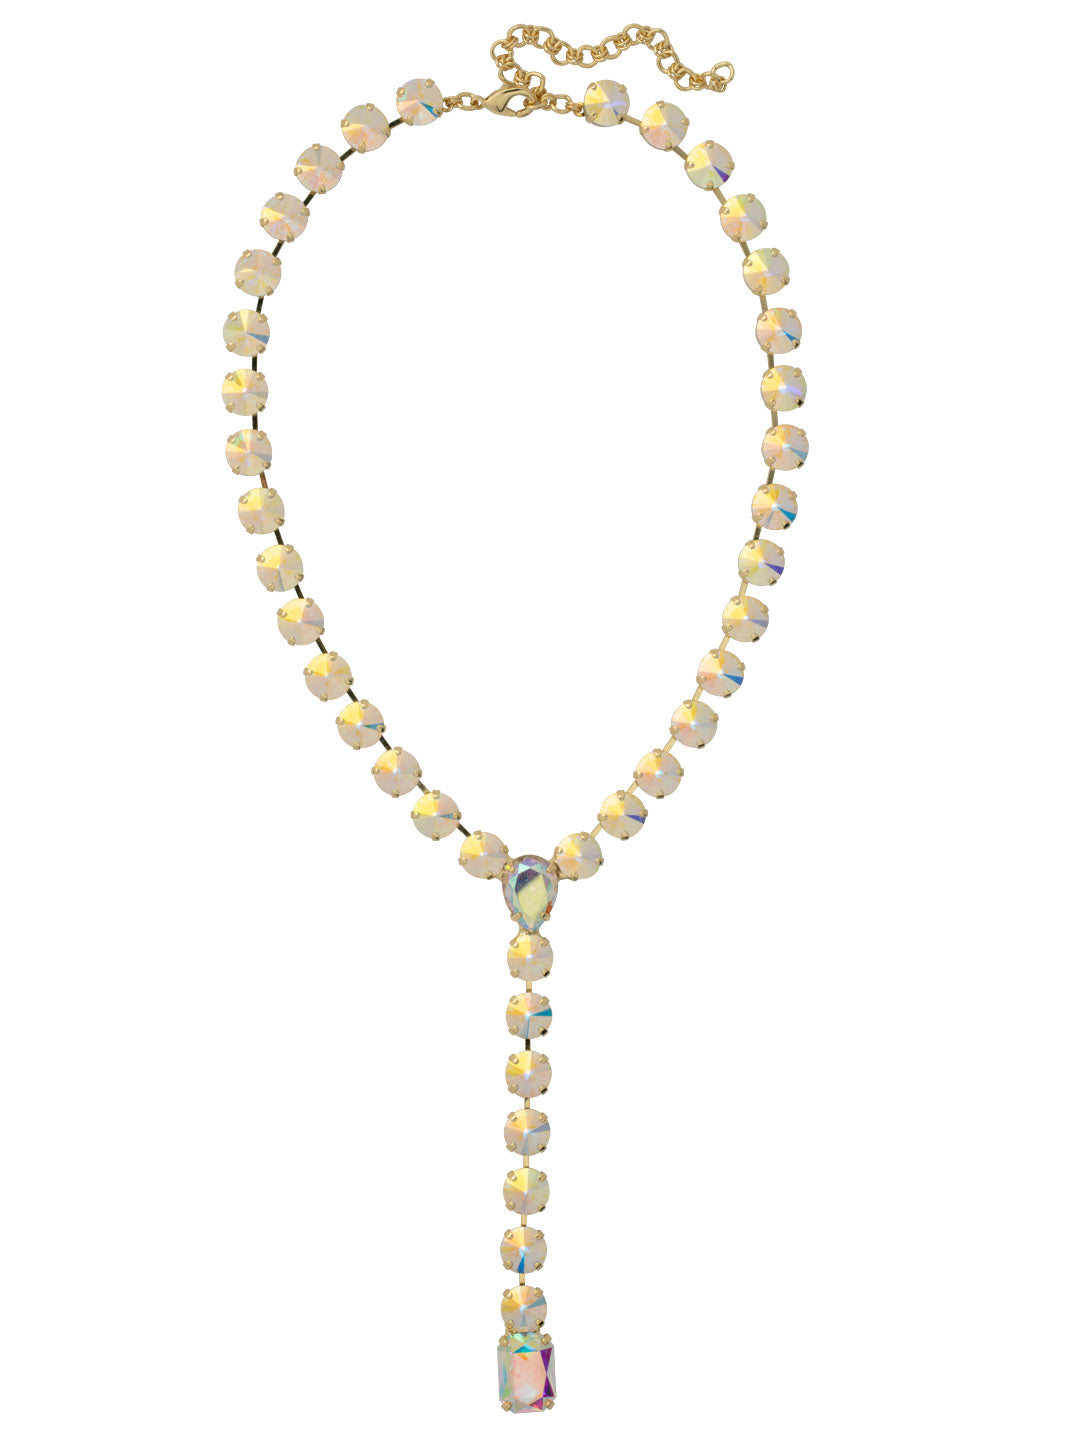 Lemon Drop Beaded Statement Necklace | ORCHID and OPAL